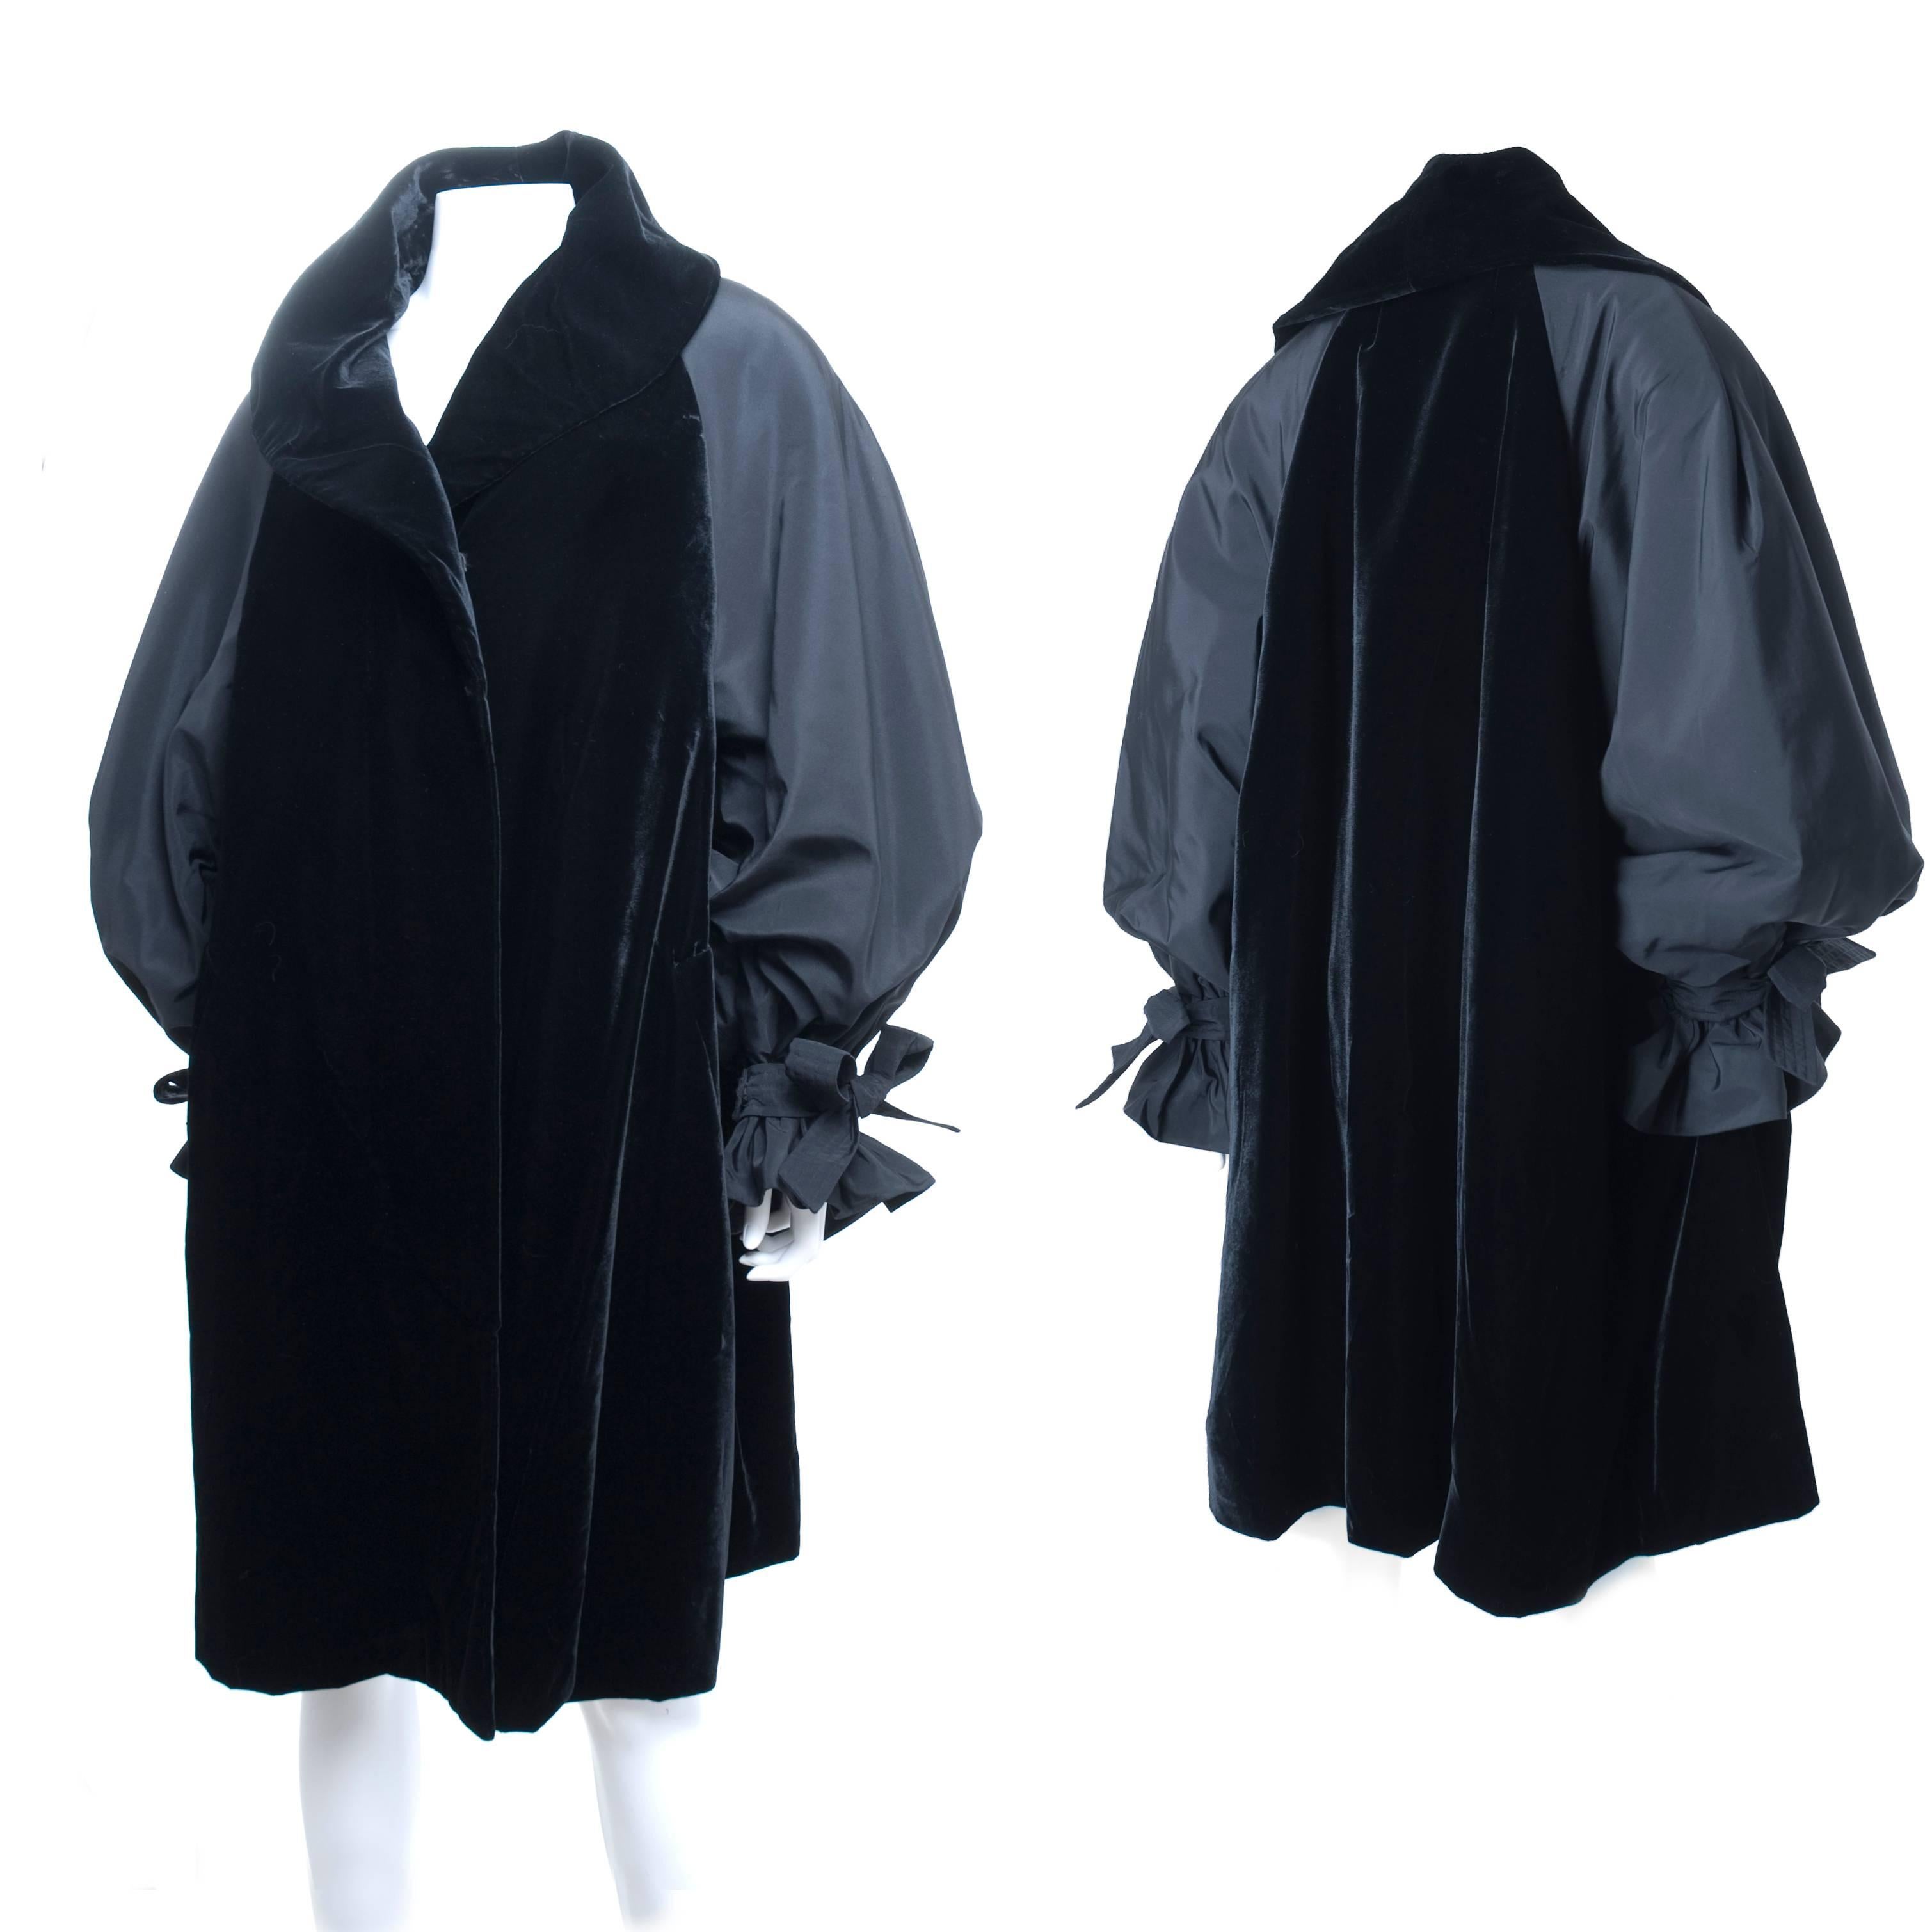 Vintage Christian Lacroix black velvet combined with taffeta sleeves. Oversized style coat from fall 1991 collection. Featuring a black velvet shawl collar and sleeves with frilled cuff and attached bow. Four black velvet buttons fastening and one